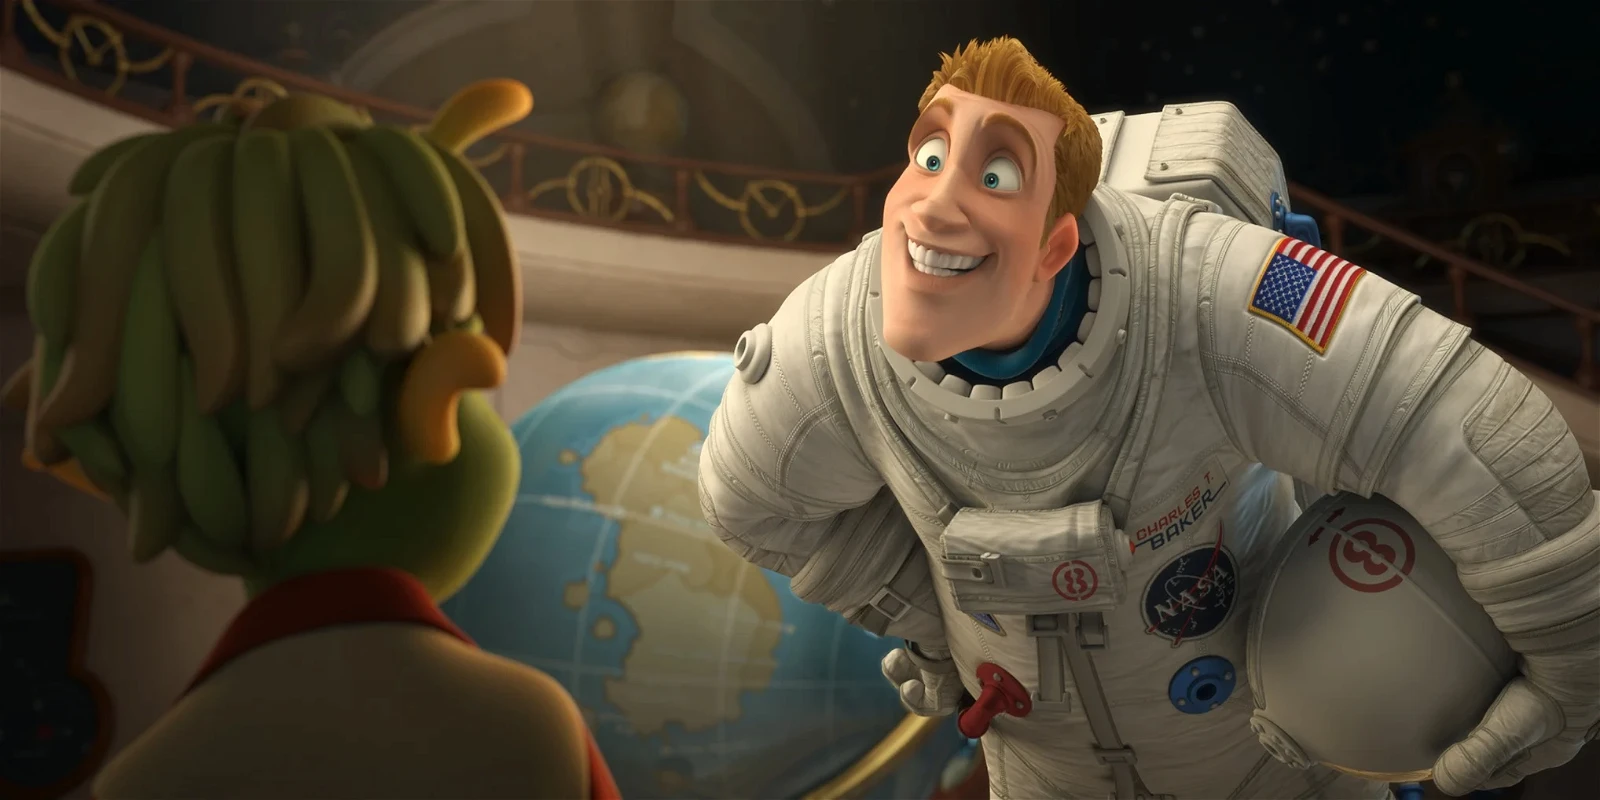 Dwayne Johnson gave his voice to Capt. Charles "Chuck" Baker in Planet 51